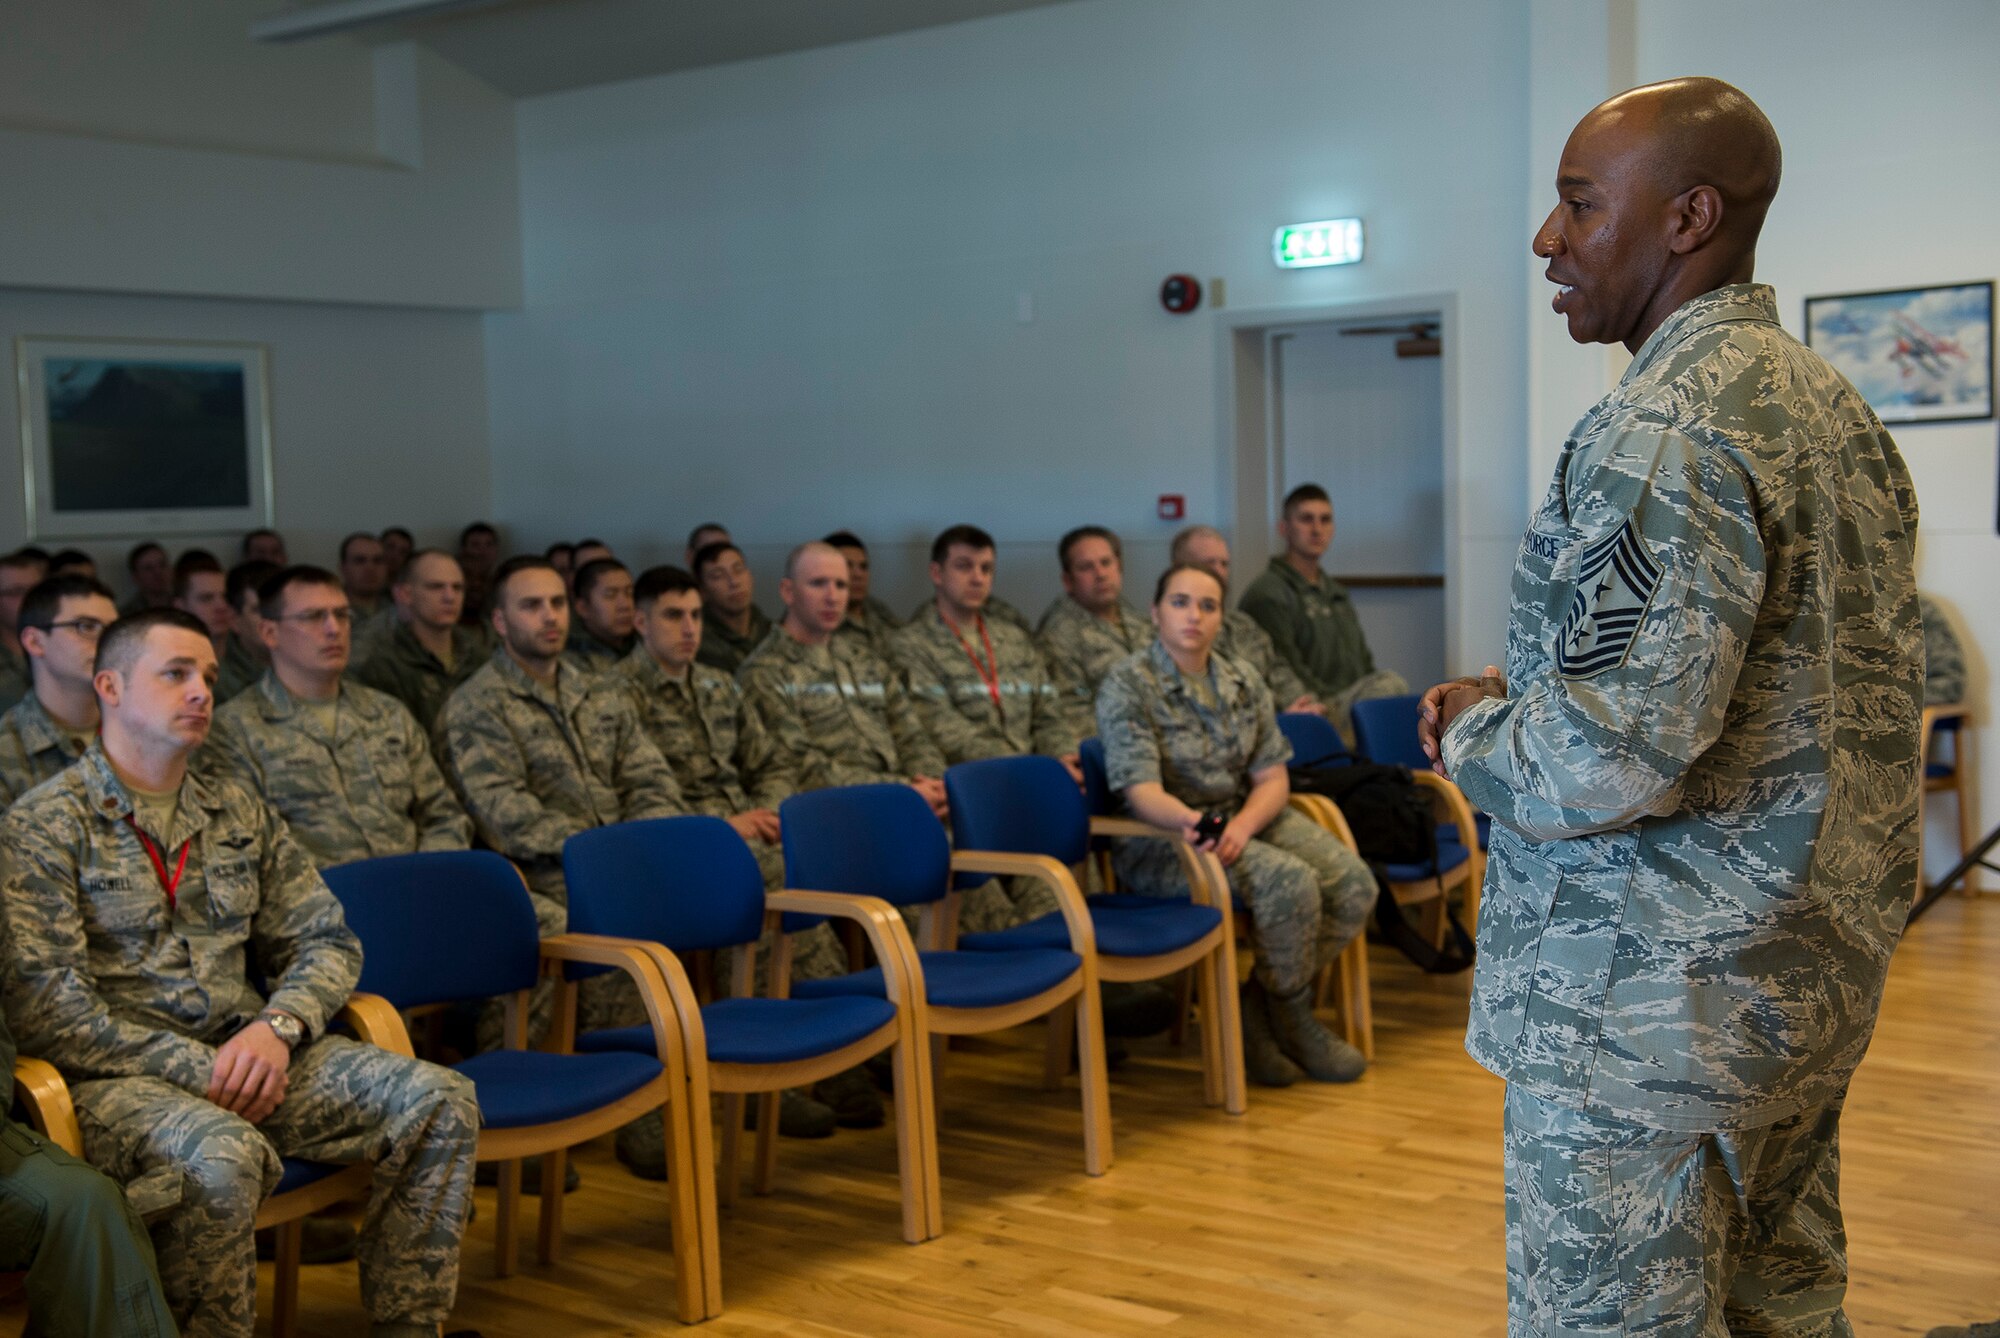 U.S. Air Force Chief Master Sgt. Kaleth Wright, 3rd Air Force command chief, addresses members of the 871st Air Expeditionary Squadron at the Icelandic Air Surveillance and Policing conference center in Keflavik, Iceland, April 23, 2015. Wright and U.S. Air Force Lt. Gen. Darryl Roberson, 3rd AF commander, toured the facilities and spoke with Airmen regarding the IAS mission, an ongoing NATO commitment to maintain the security of Iceland’s airspace.(U.S. Air Force photo by Staff Sgt. Chad Warren/Released)